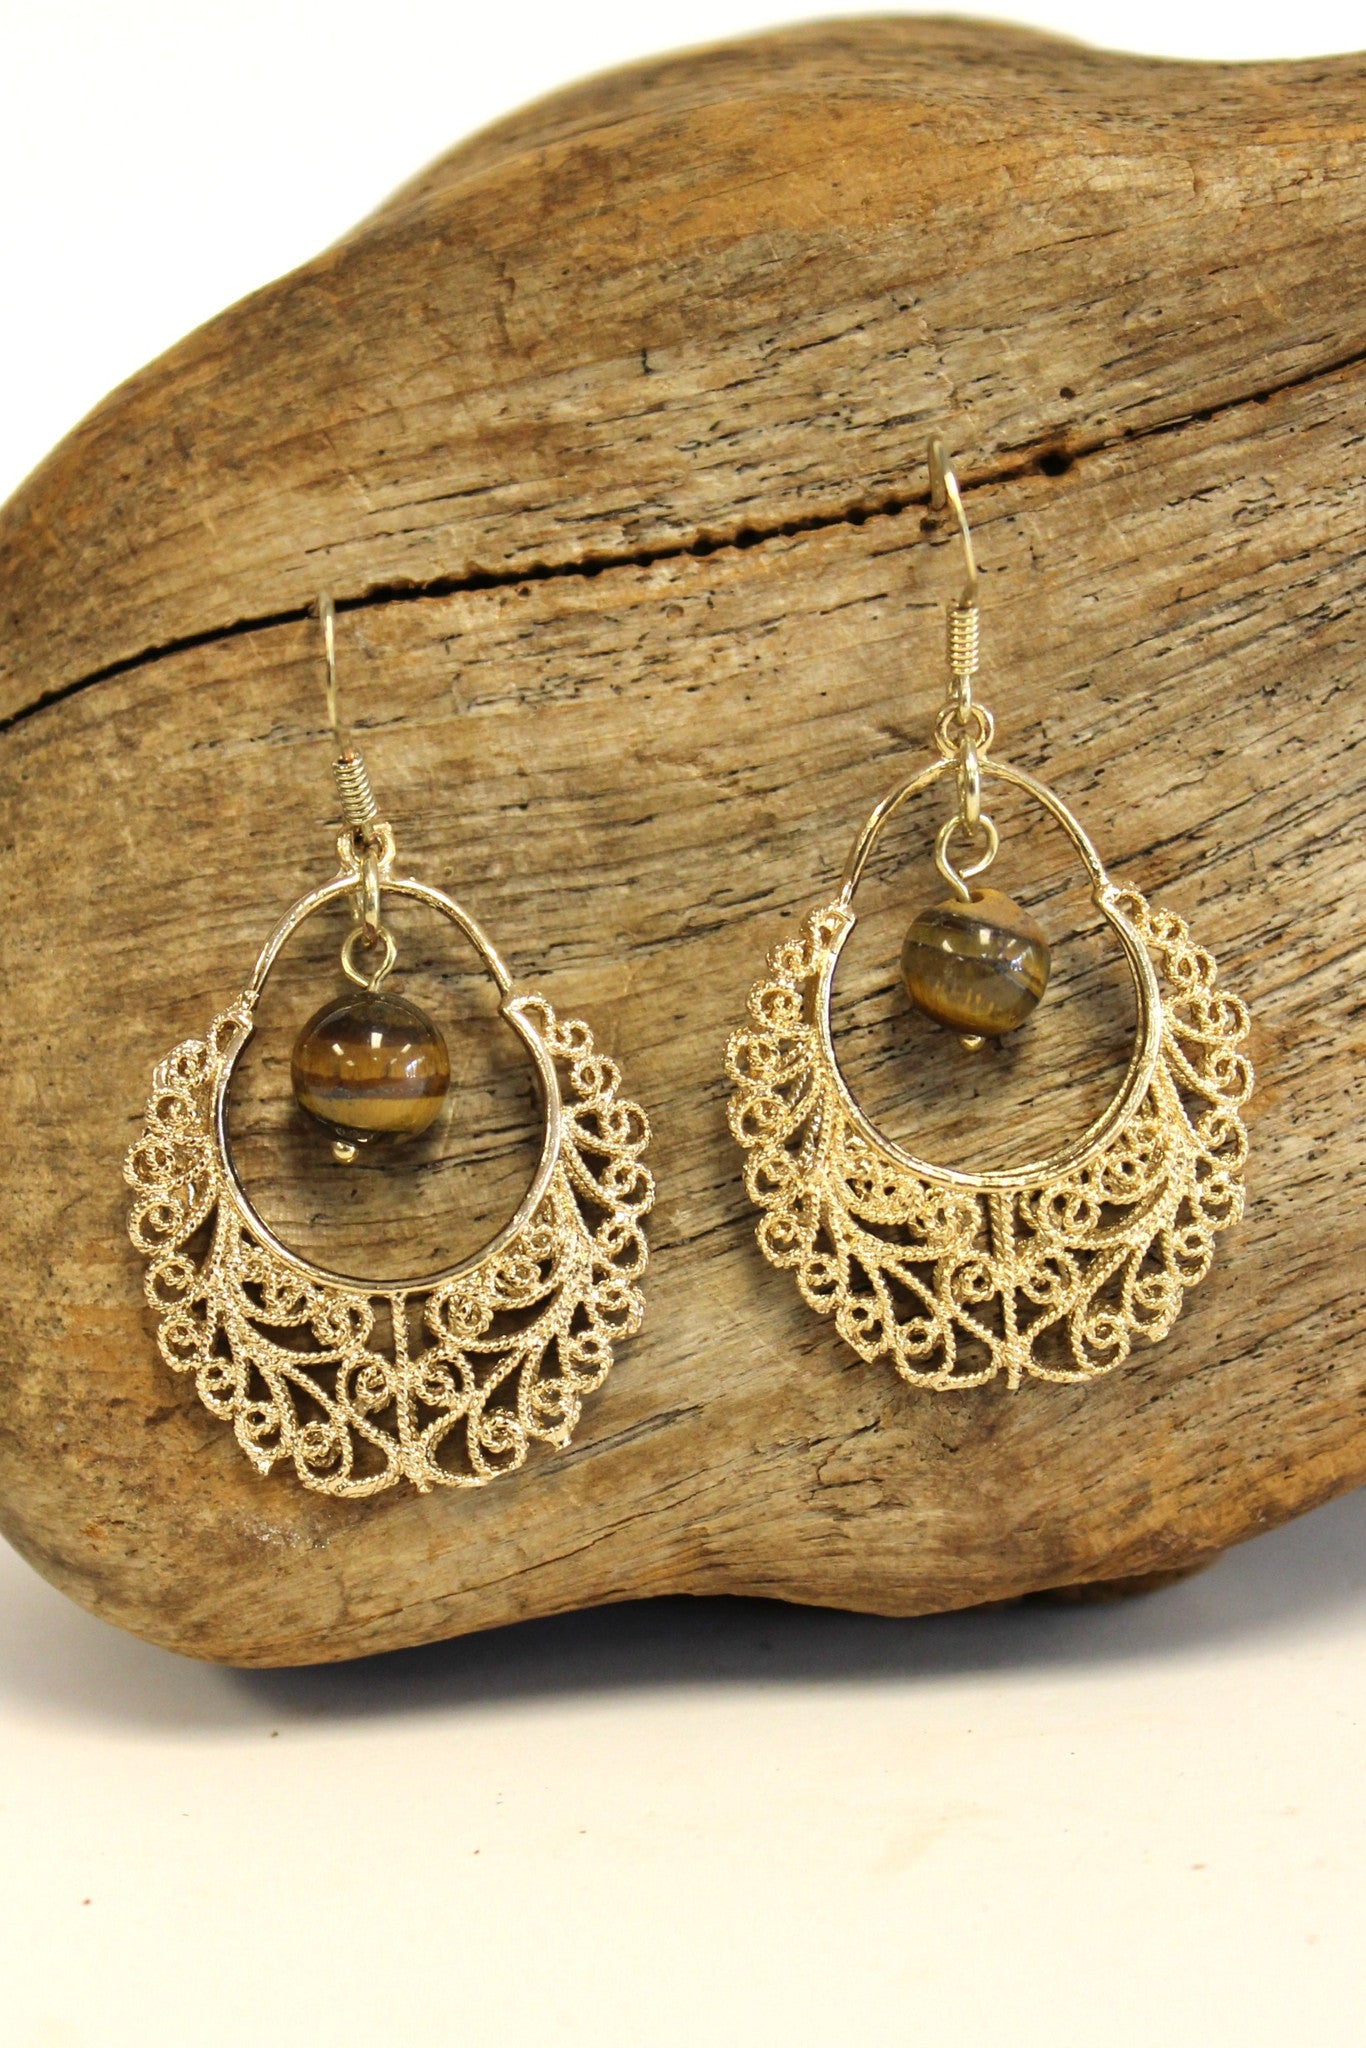 Filigree Earrings with Bead, Gold - Elise